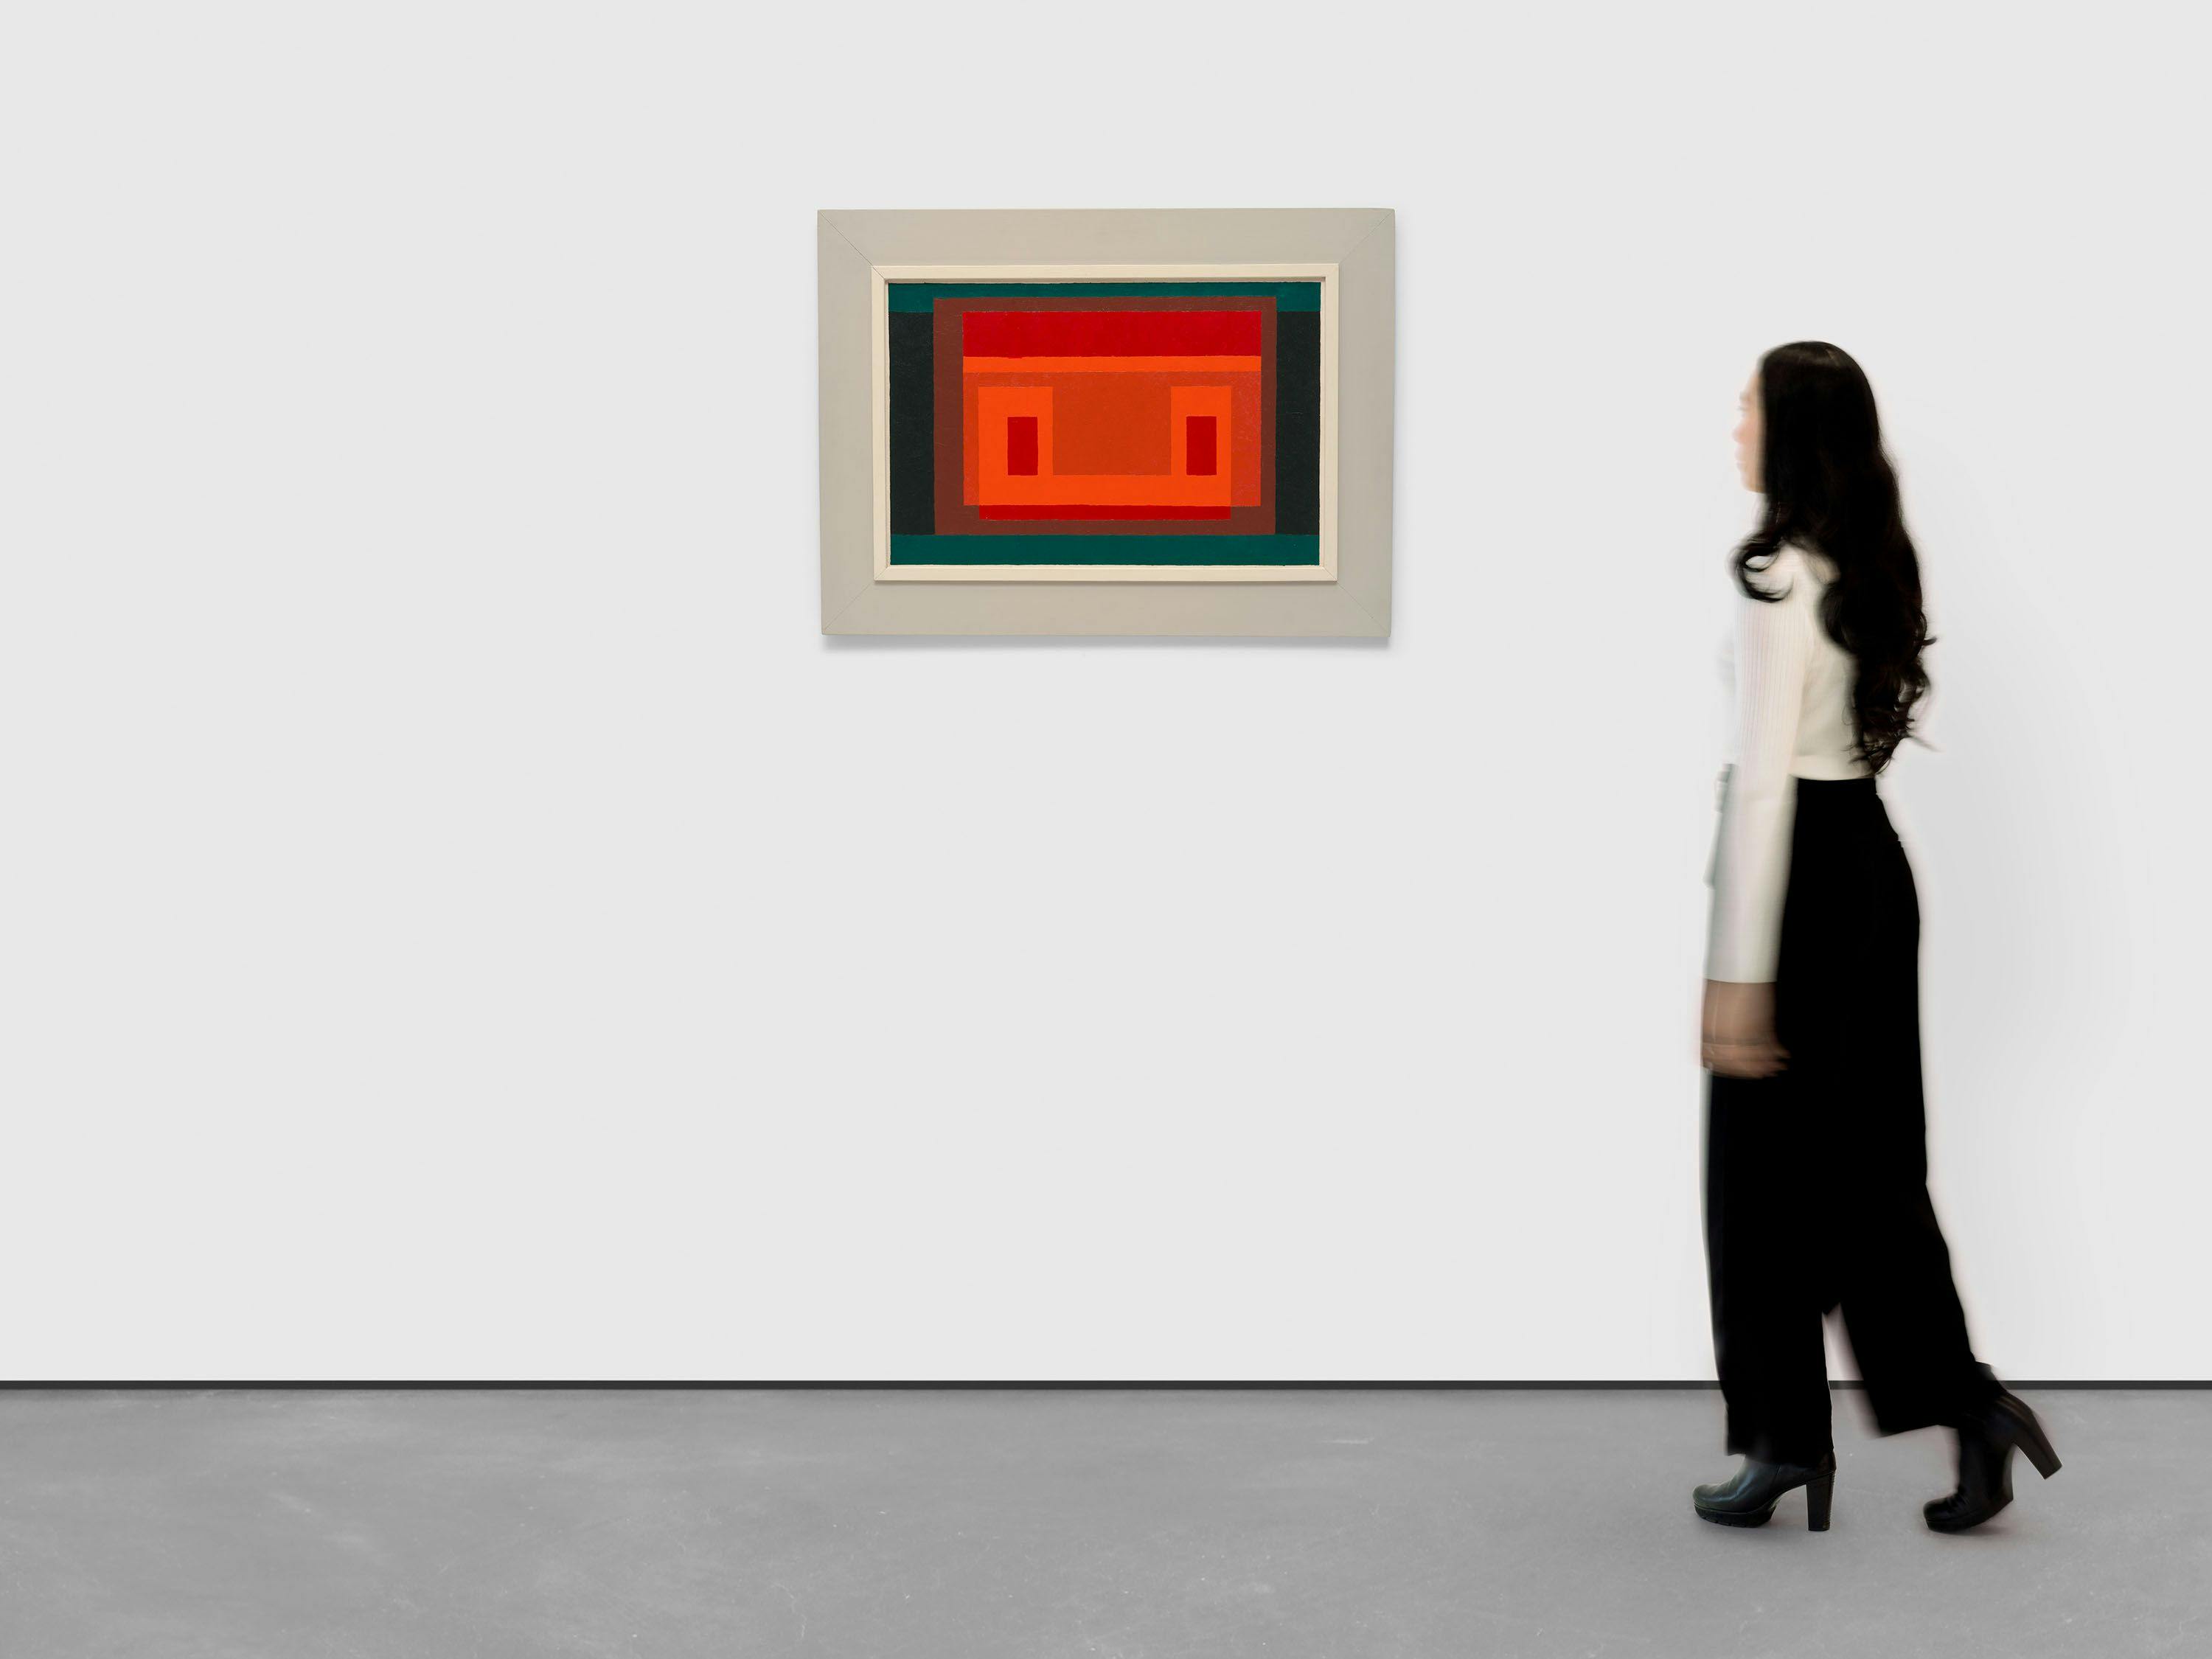 A painting by Josef Albers, titled On the Other Side, dated 1952.